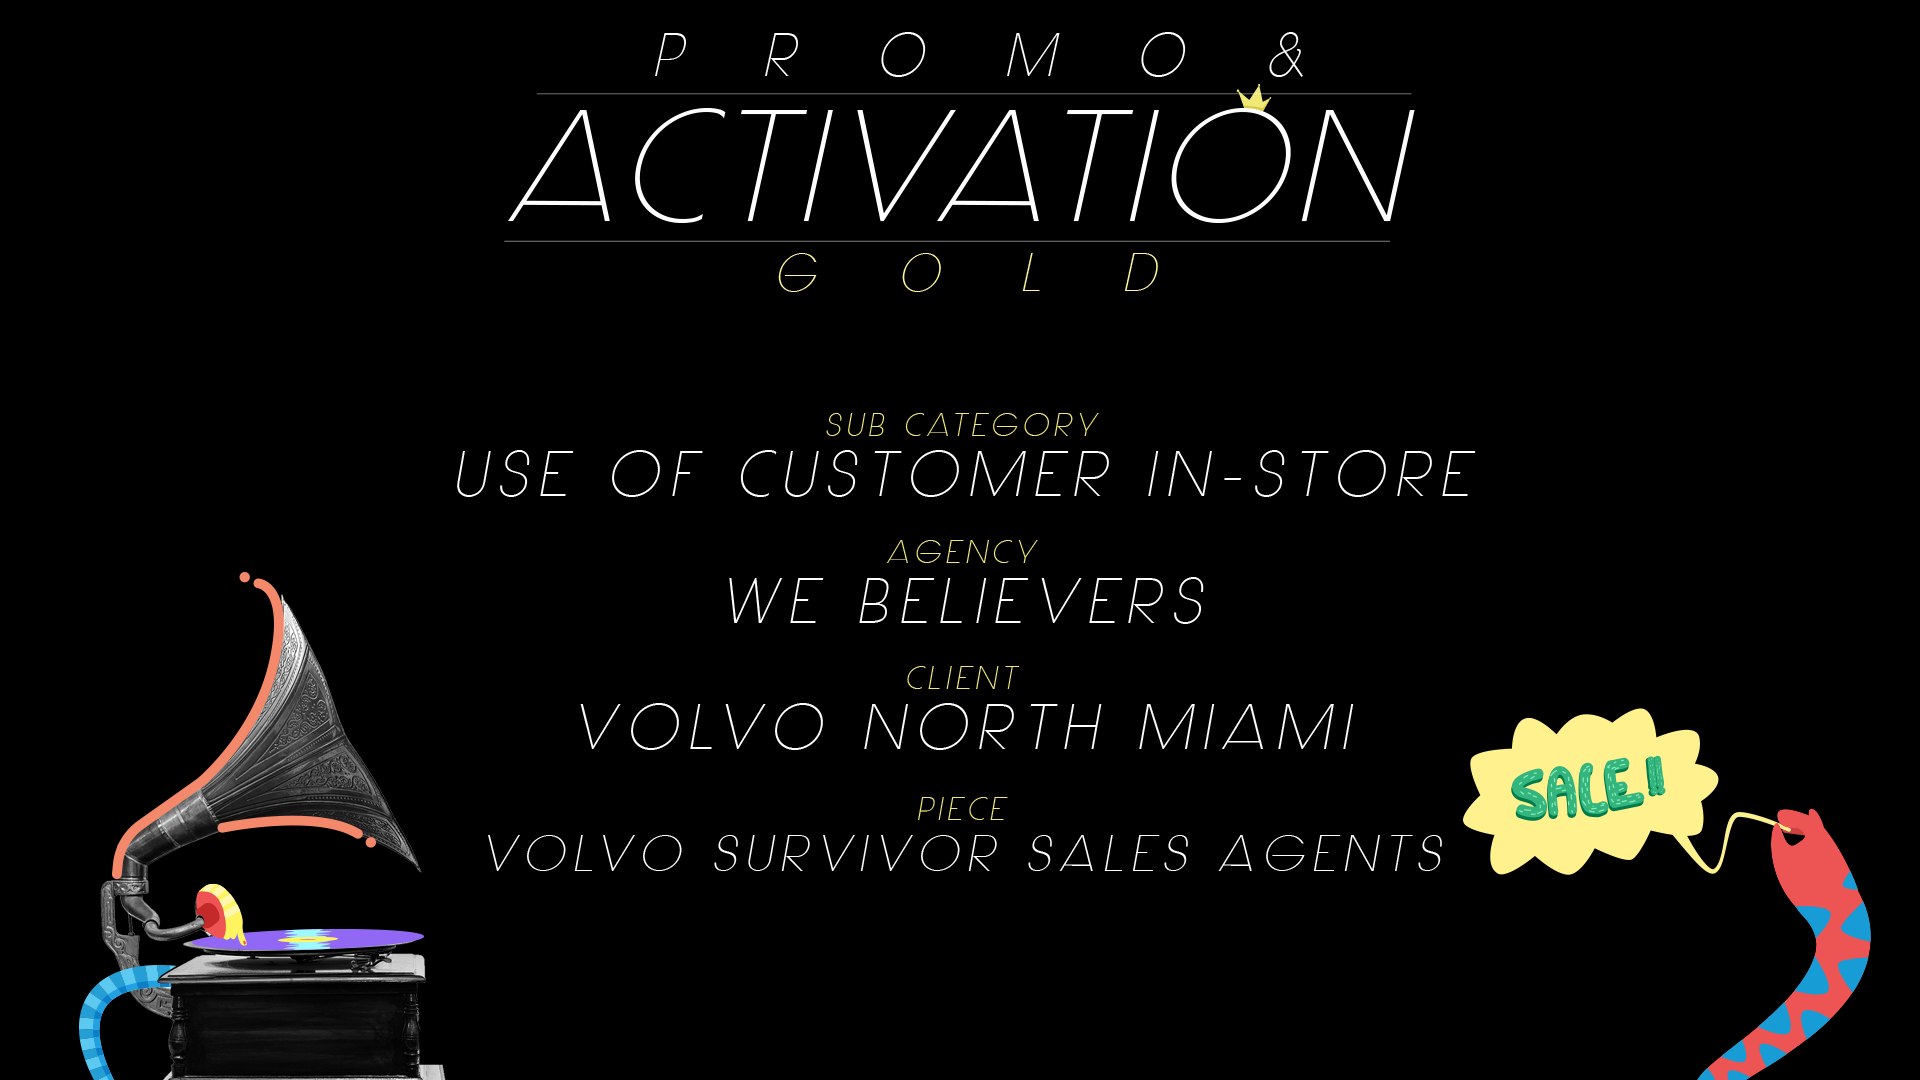 14.PLACAS GOLD-promo activation-USE OF CUSTOMER IN-STORE .png